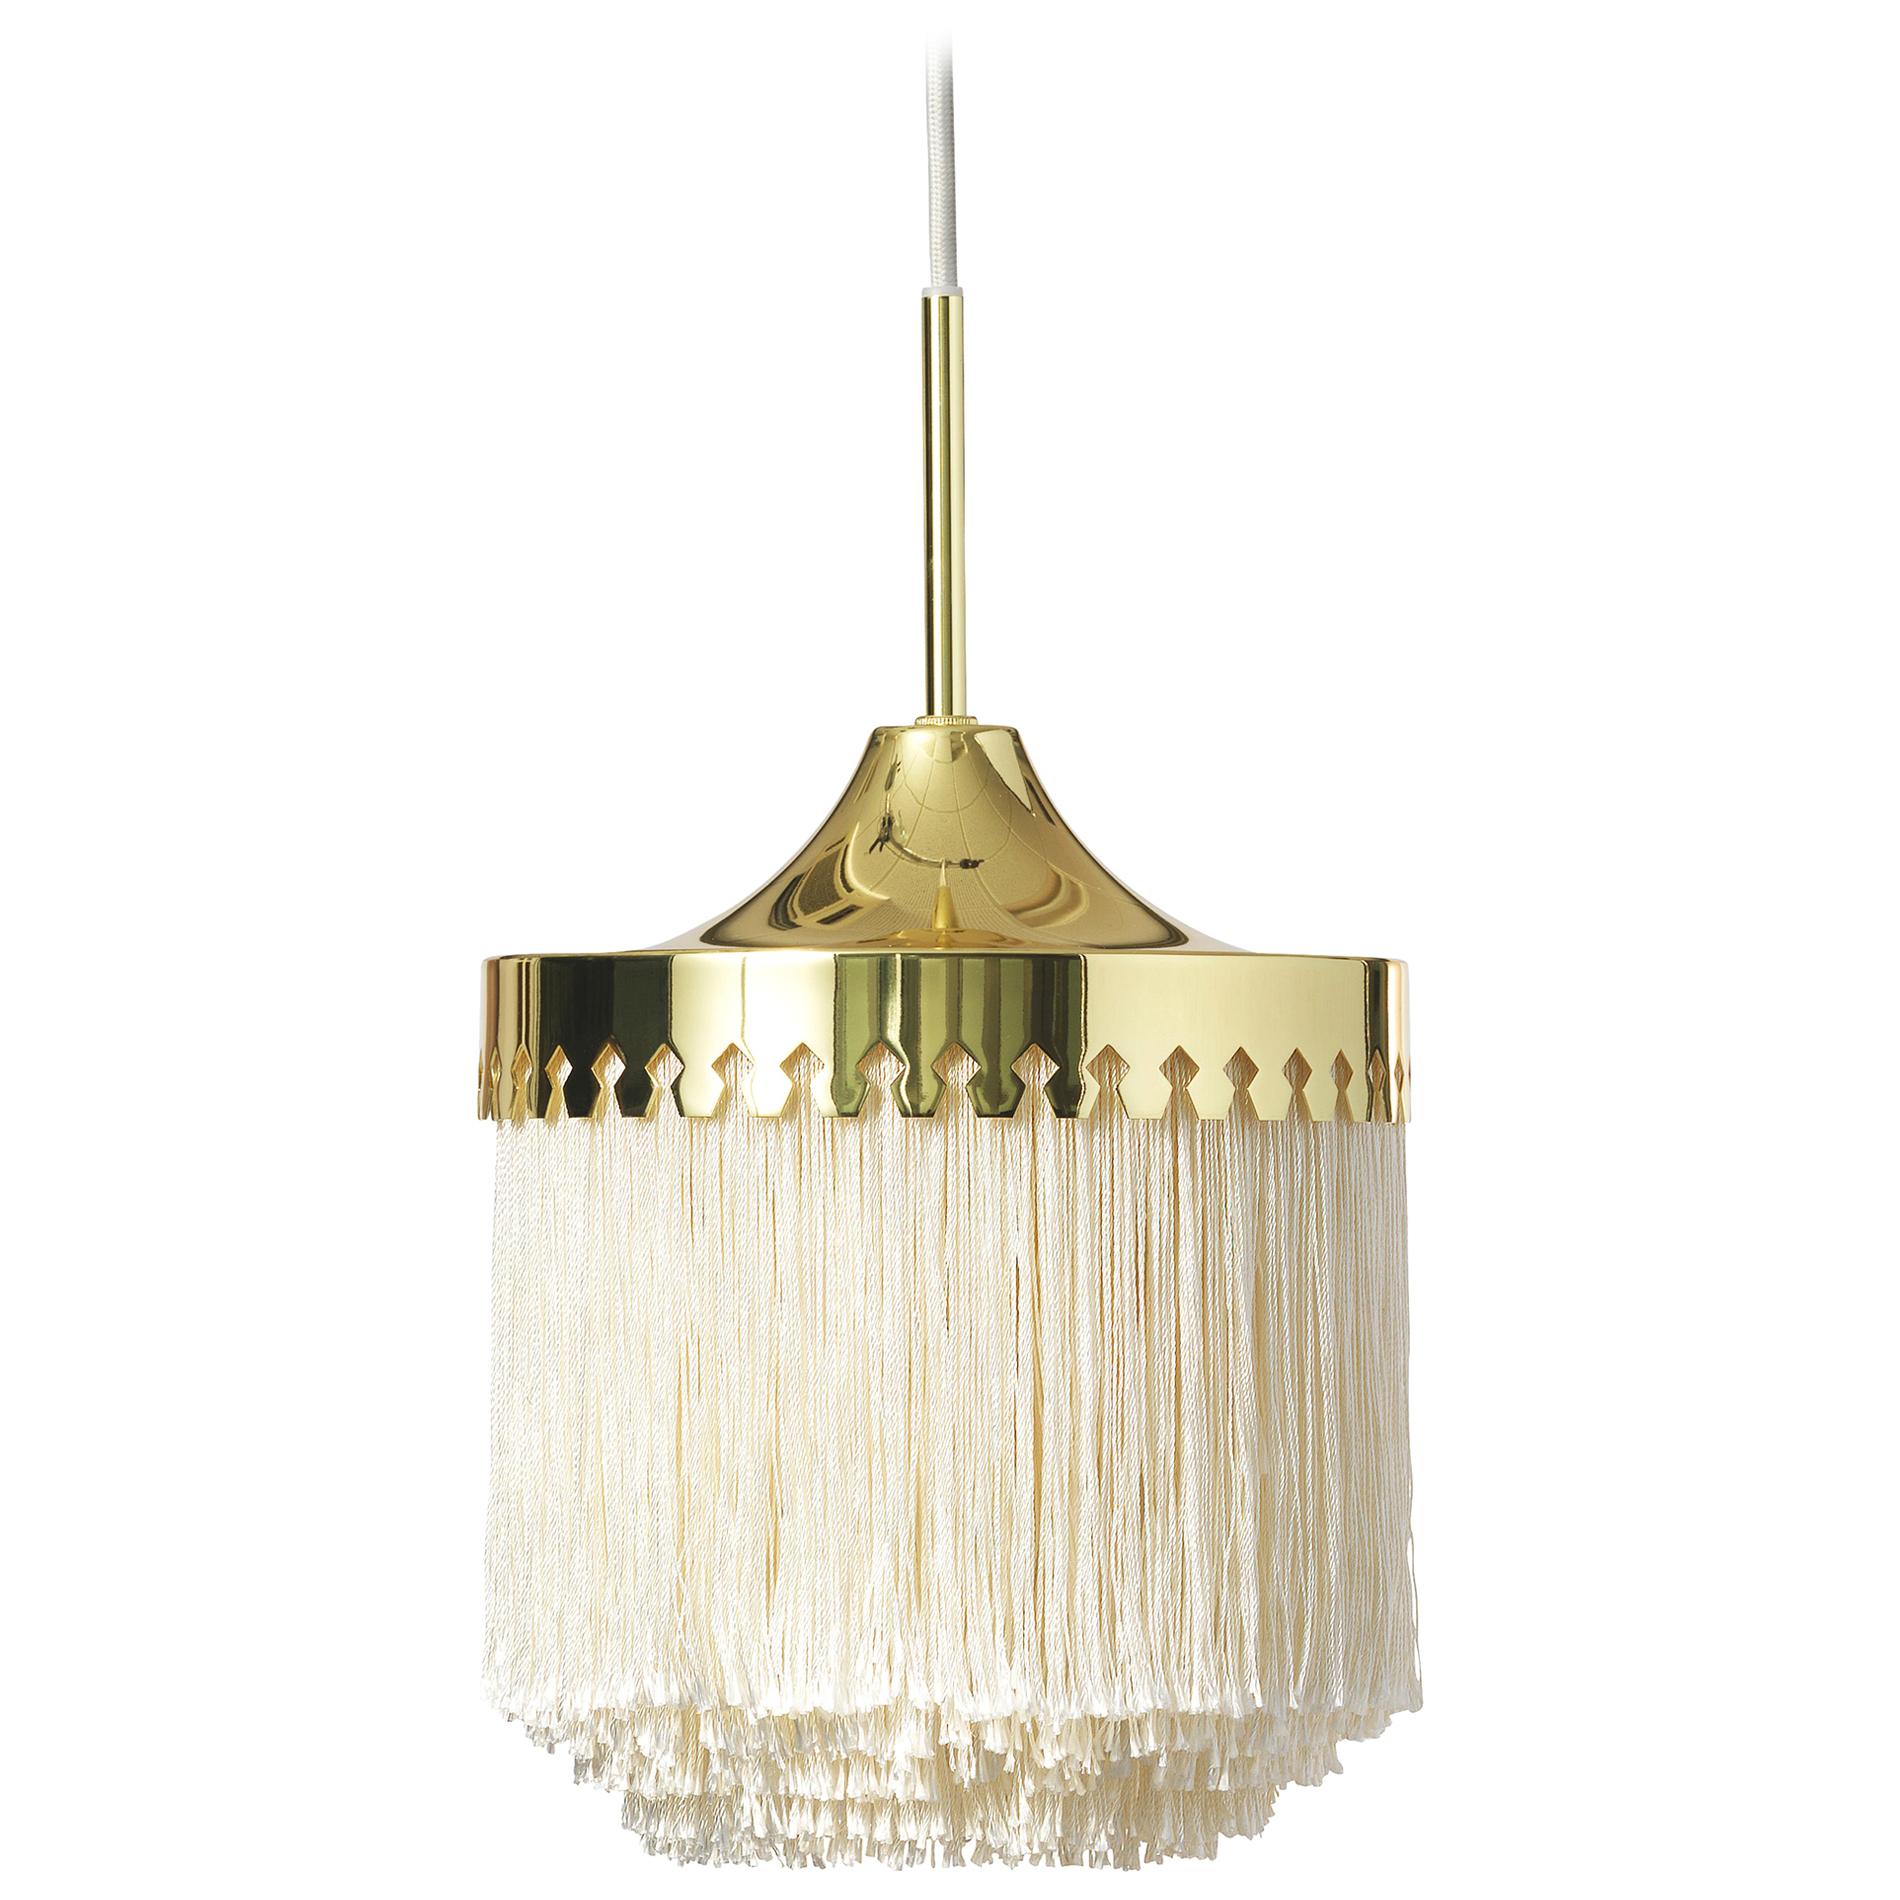 For Sale: White (Cream White) Fringe Small Pendant, by Hans Agne Jakobsson from Warm Nordic